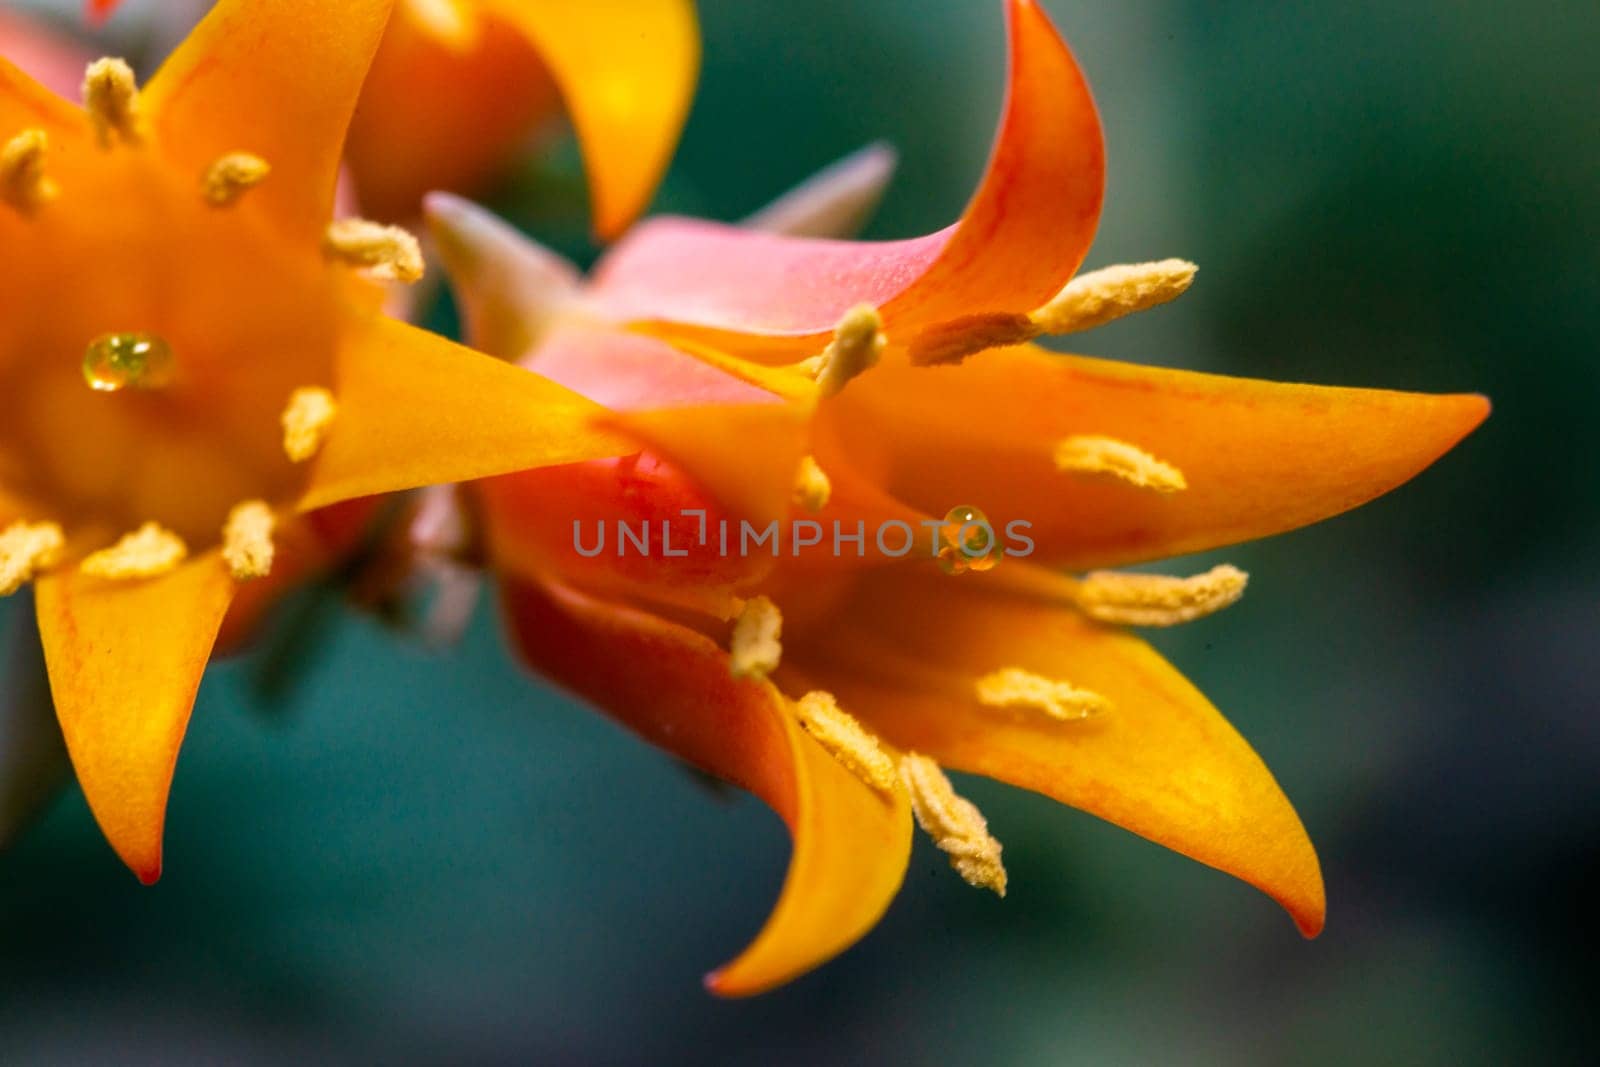 Close-up of a flower, succulent leaves of a succulent plant (Echeveria sp.) in a botanical collection